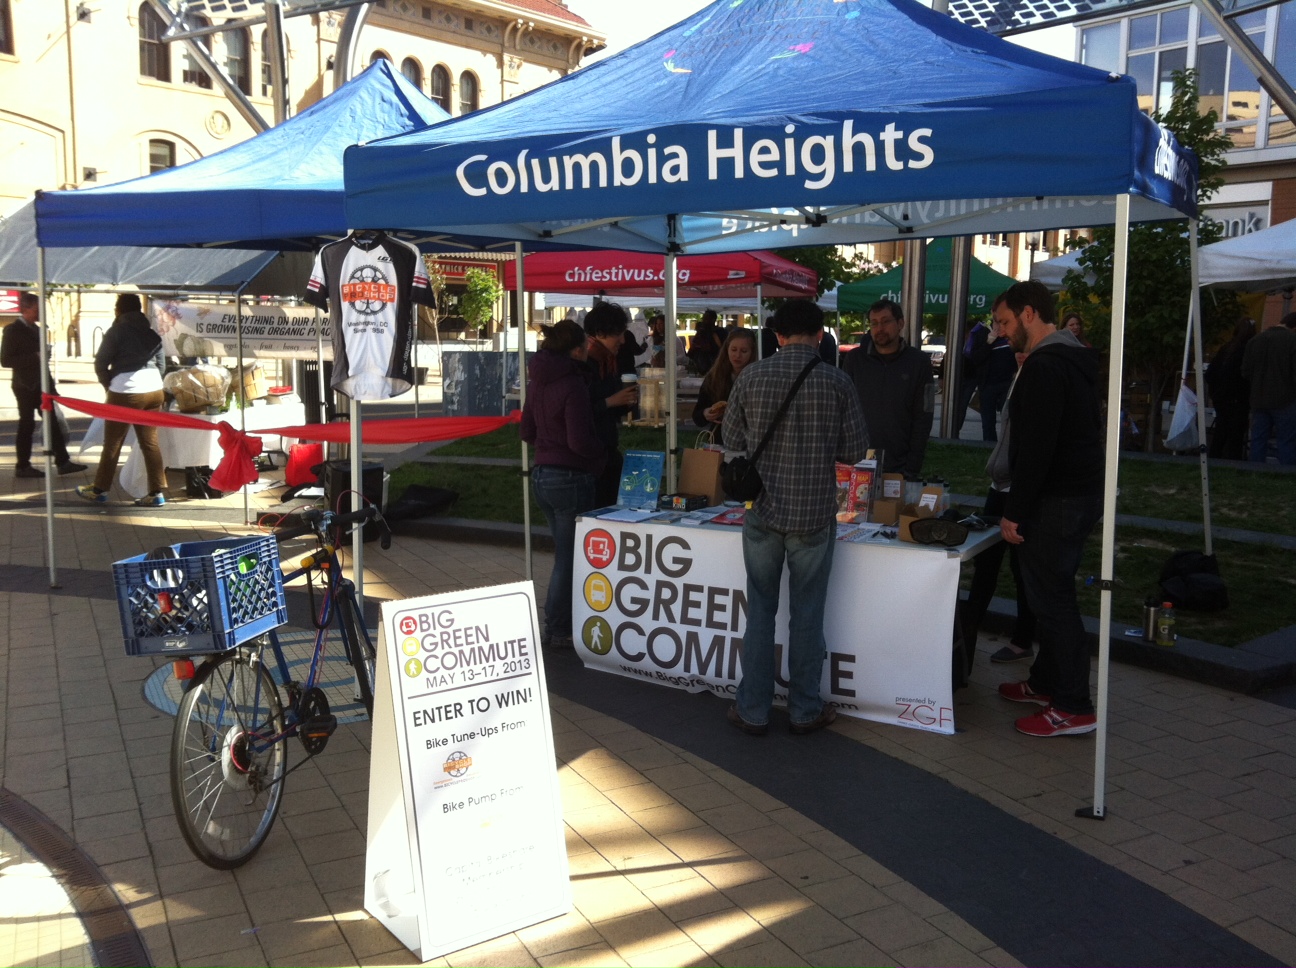 Our stand in Columbia Heights this past Saturday.